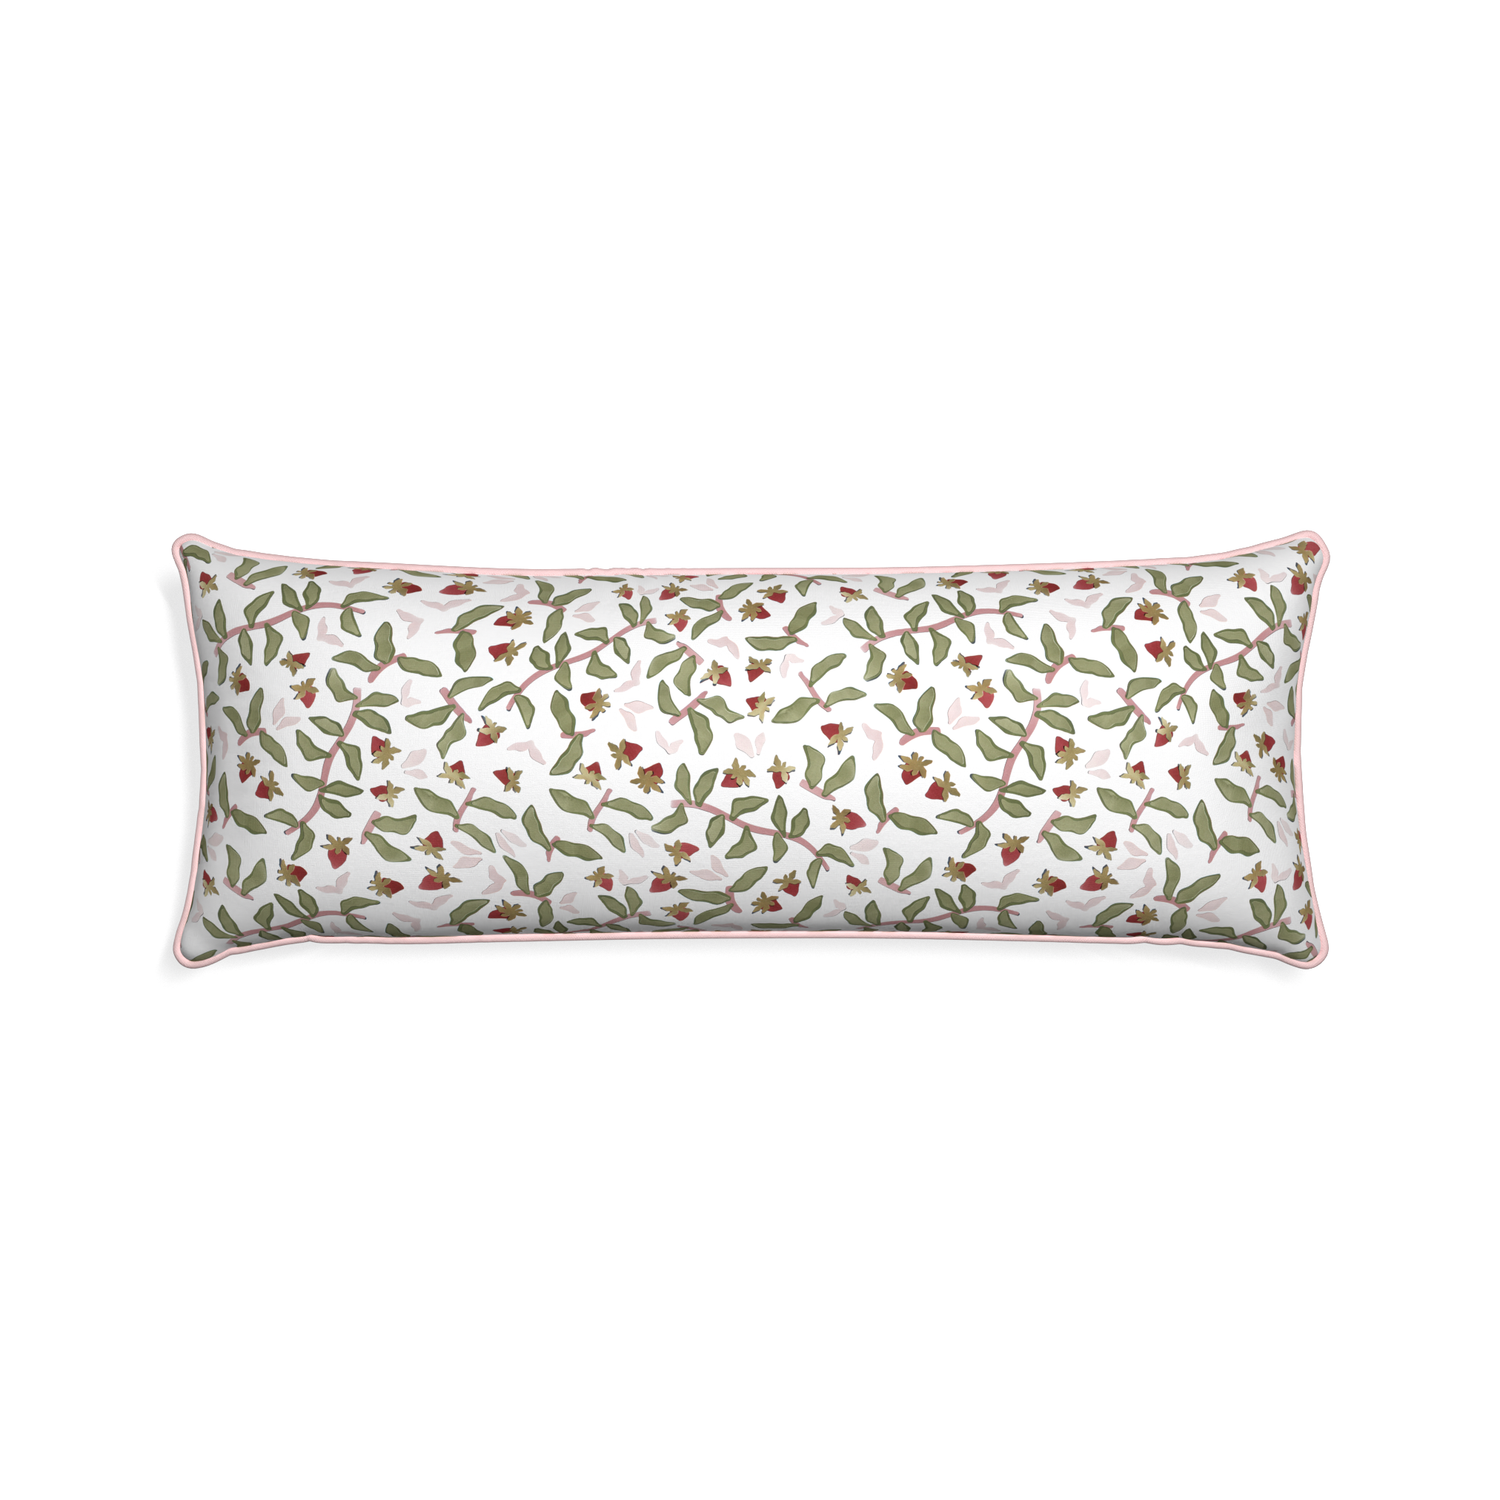 Xl-lumbar nellie custom strawberry & botanicalpillow with petal piping on white background